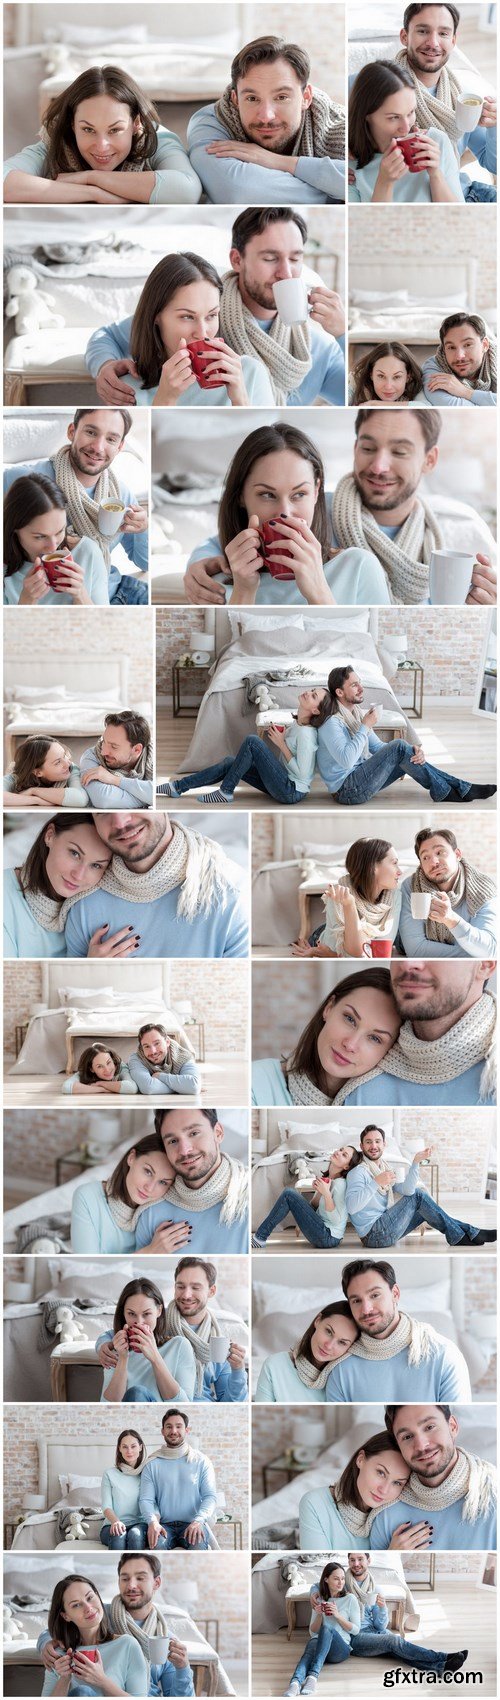 Happy young couple in a cozy bedroom - 20xUHQ JPEG Photo Stock